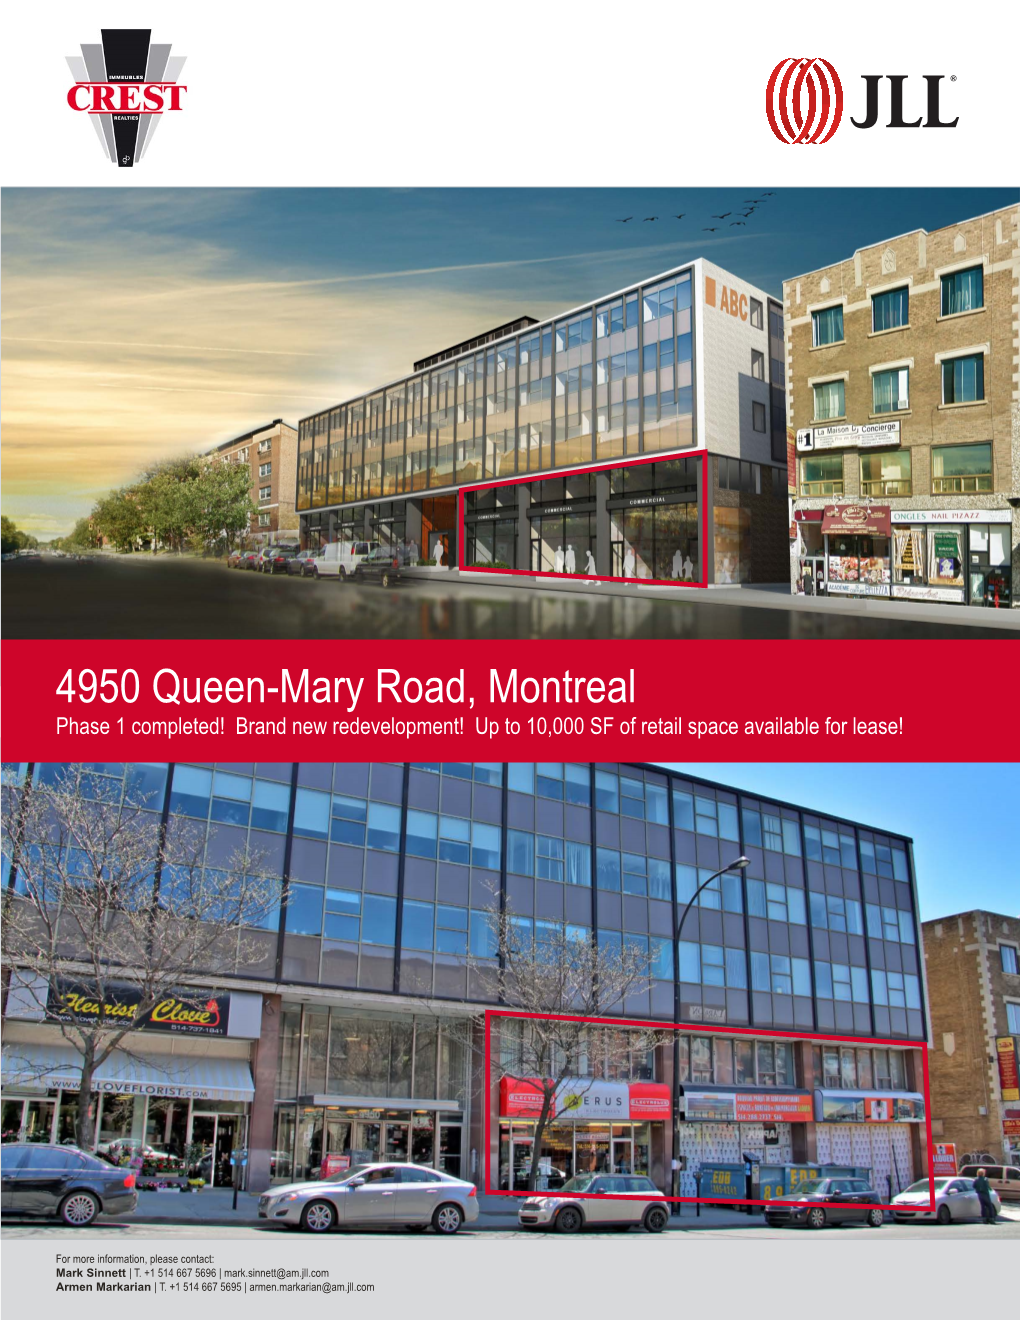 4950 Queen-Mary Road, Montreal Phase 1 Completed! Brand New Redevelopment! up to 10,000 SF of Retail Space Available for Lease!